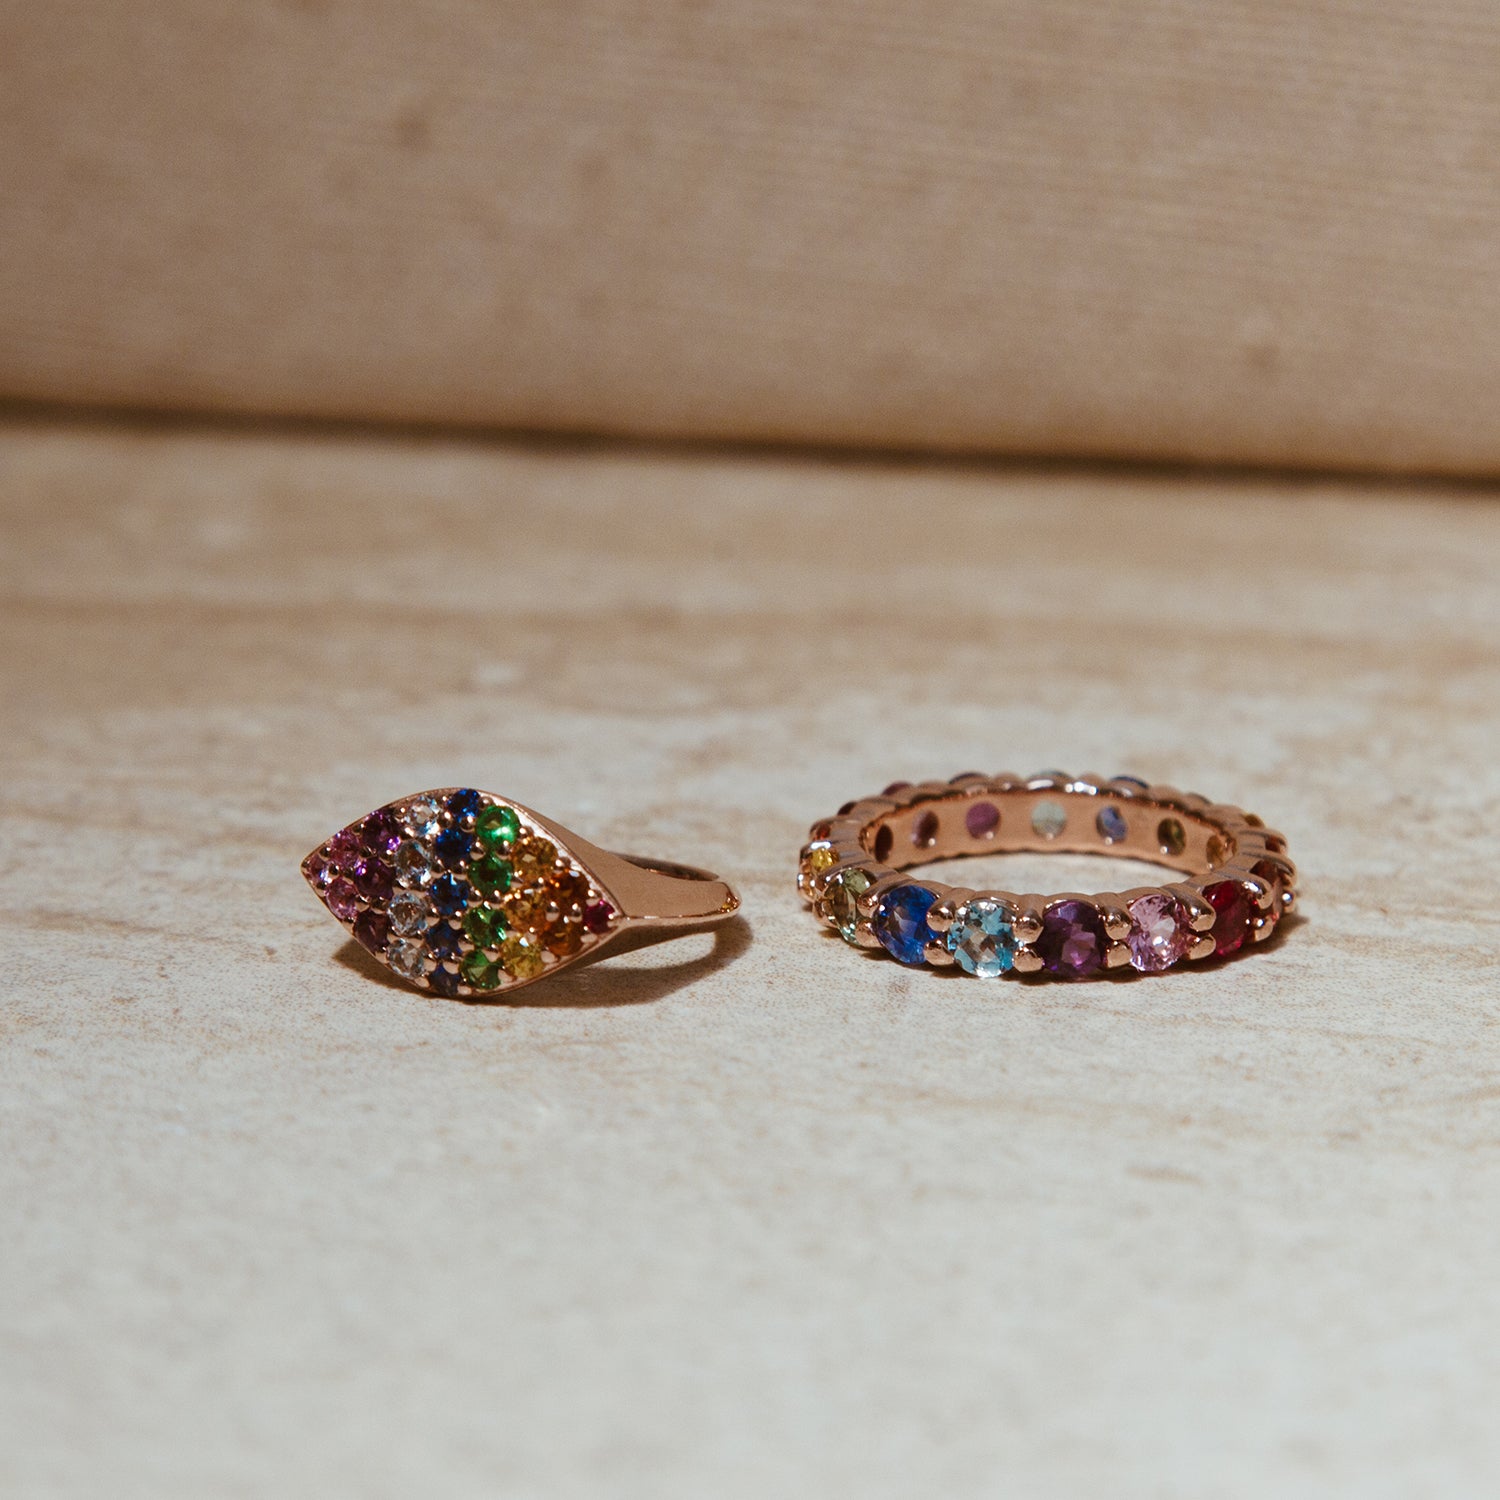 The Rainbow Eternity Band shown with the Rainbow Gemma Pinky Ring. Best when worn together!